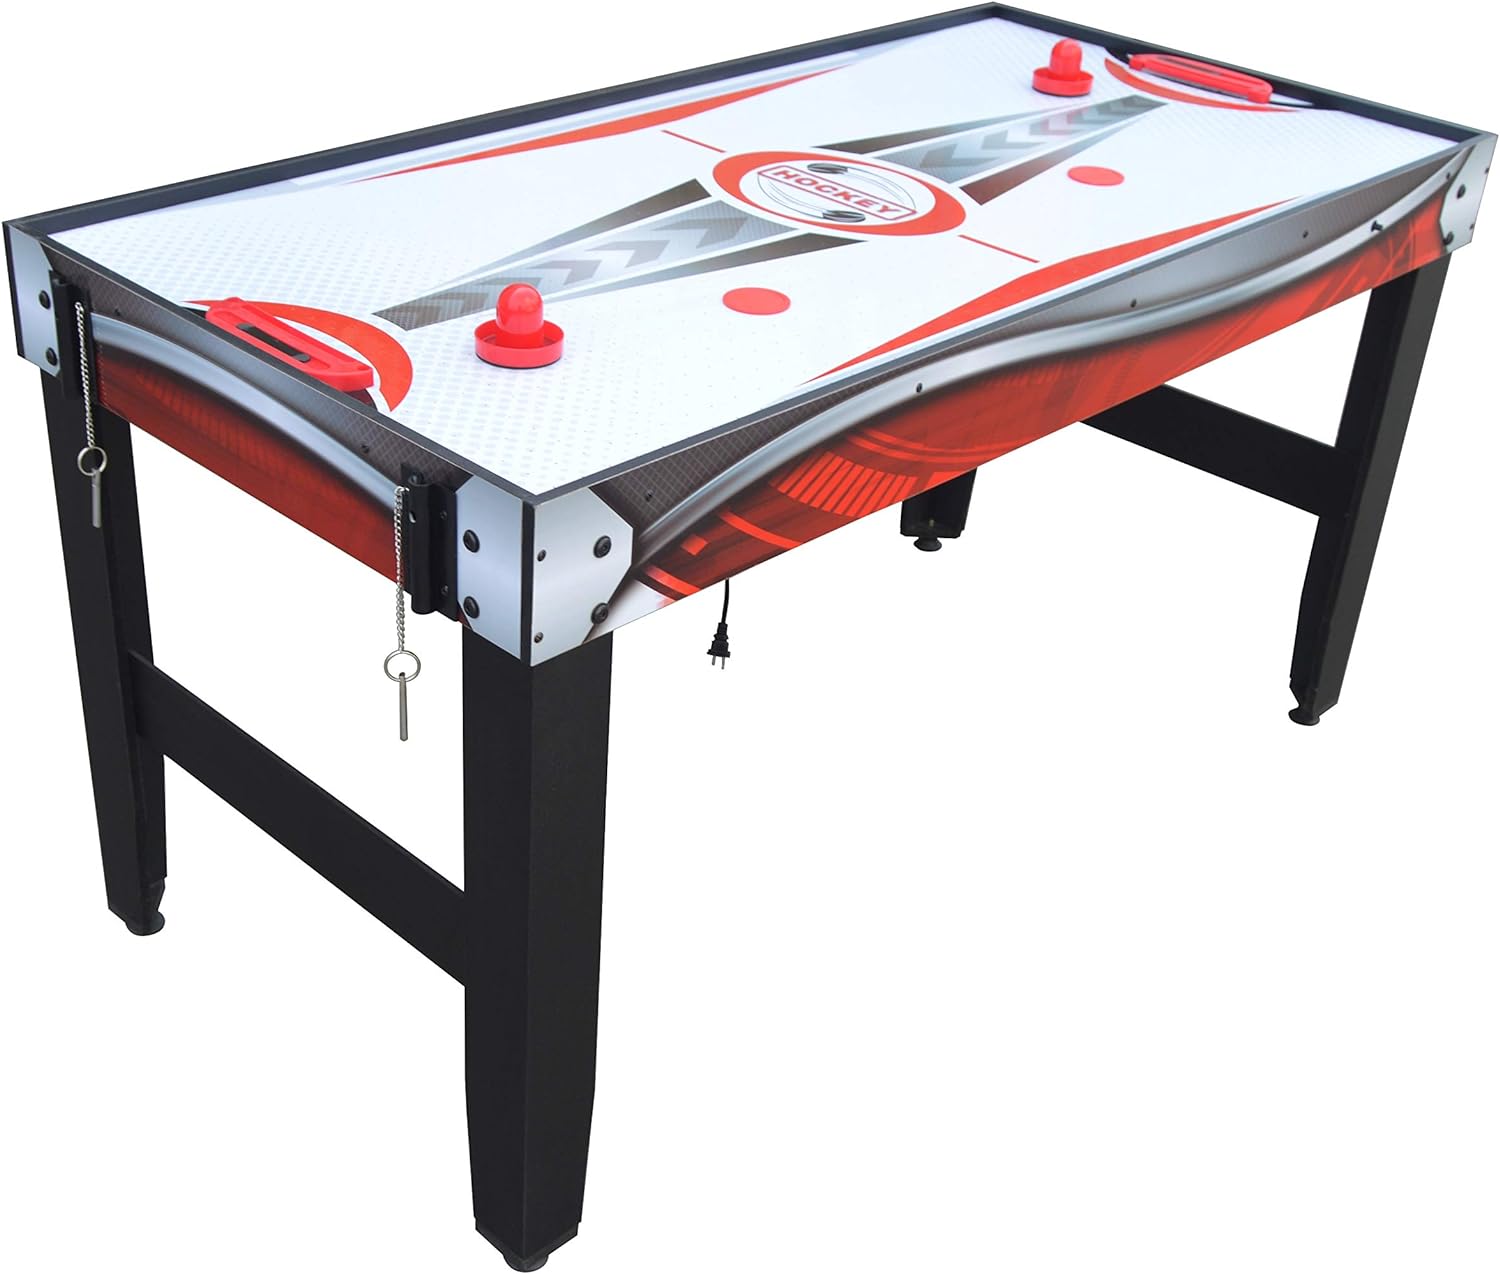 Scout 54-in Air Hockey 4-in-1 Multi-Game Table